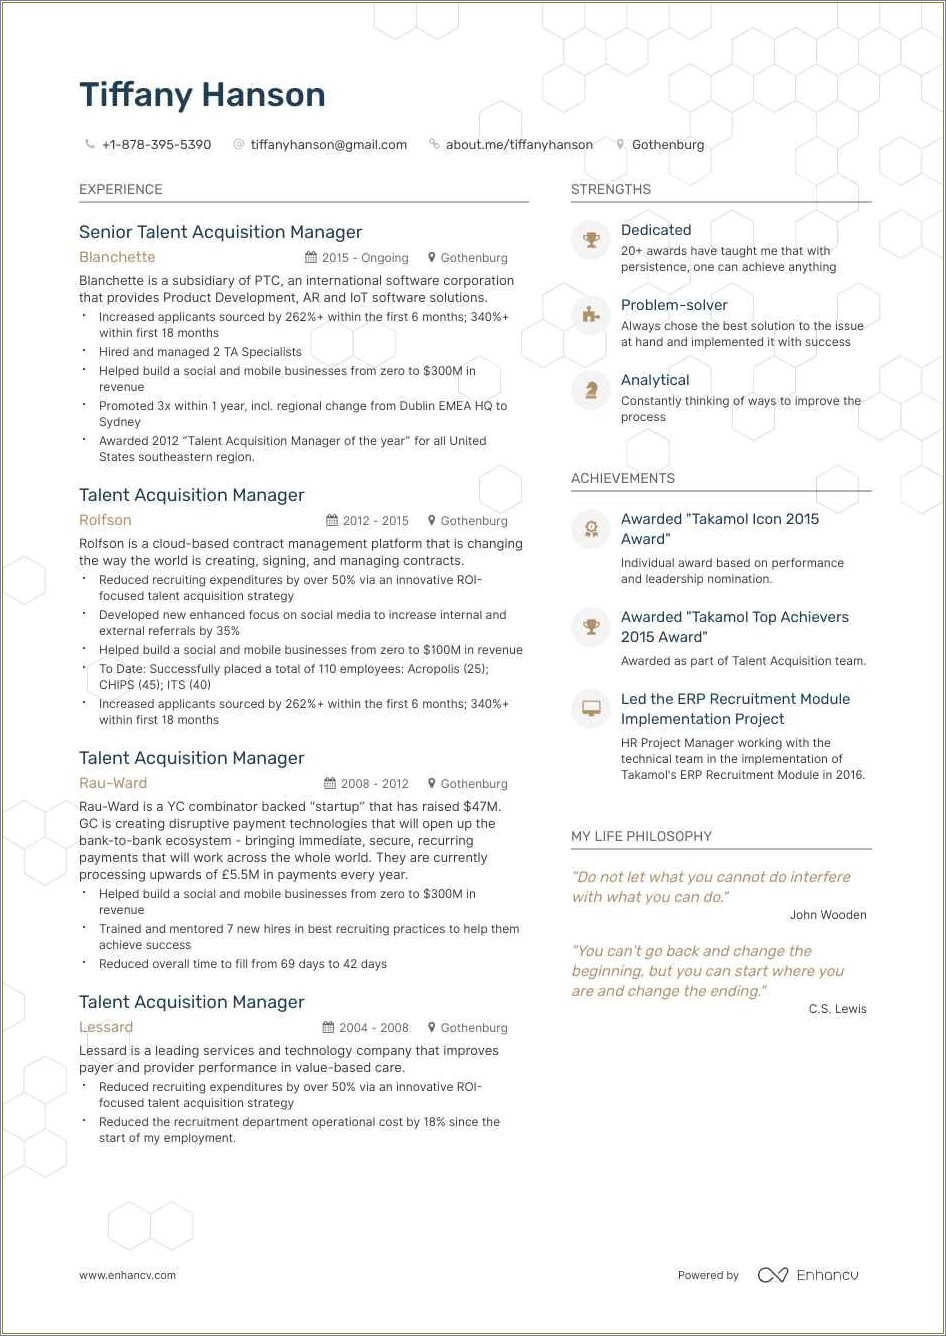 Erp Implementation Project Manager Resume - Resume Example Gallery